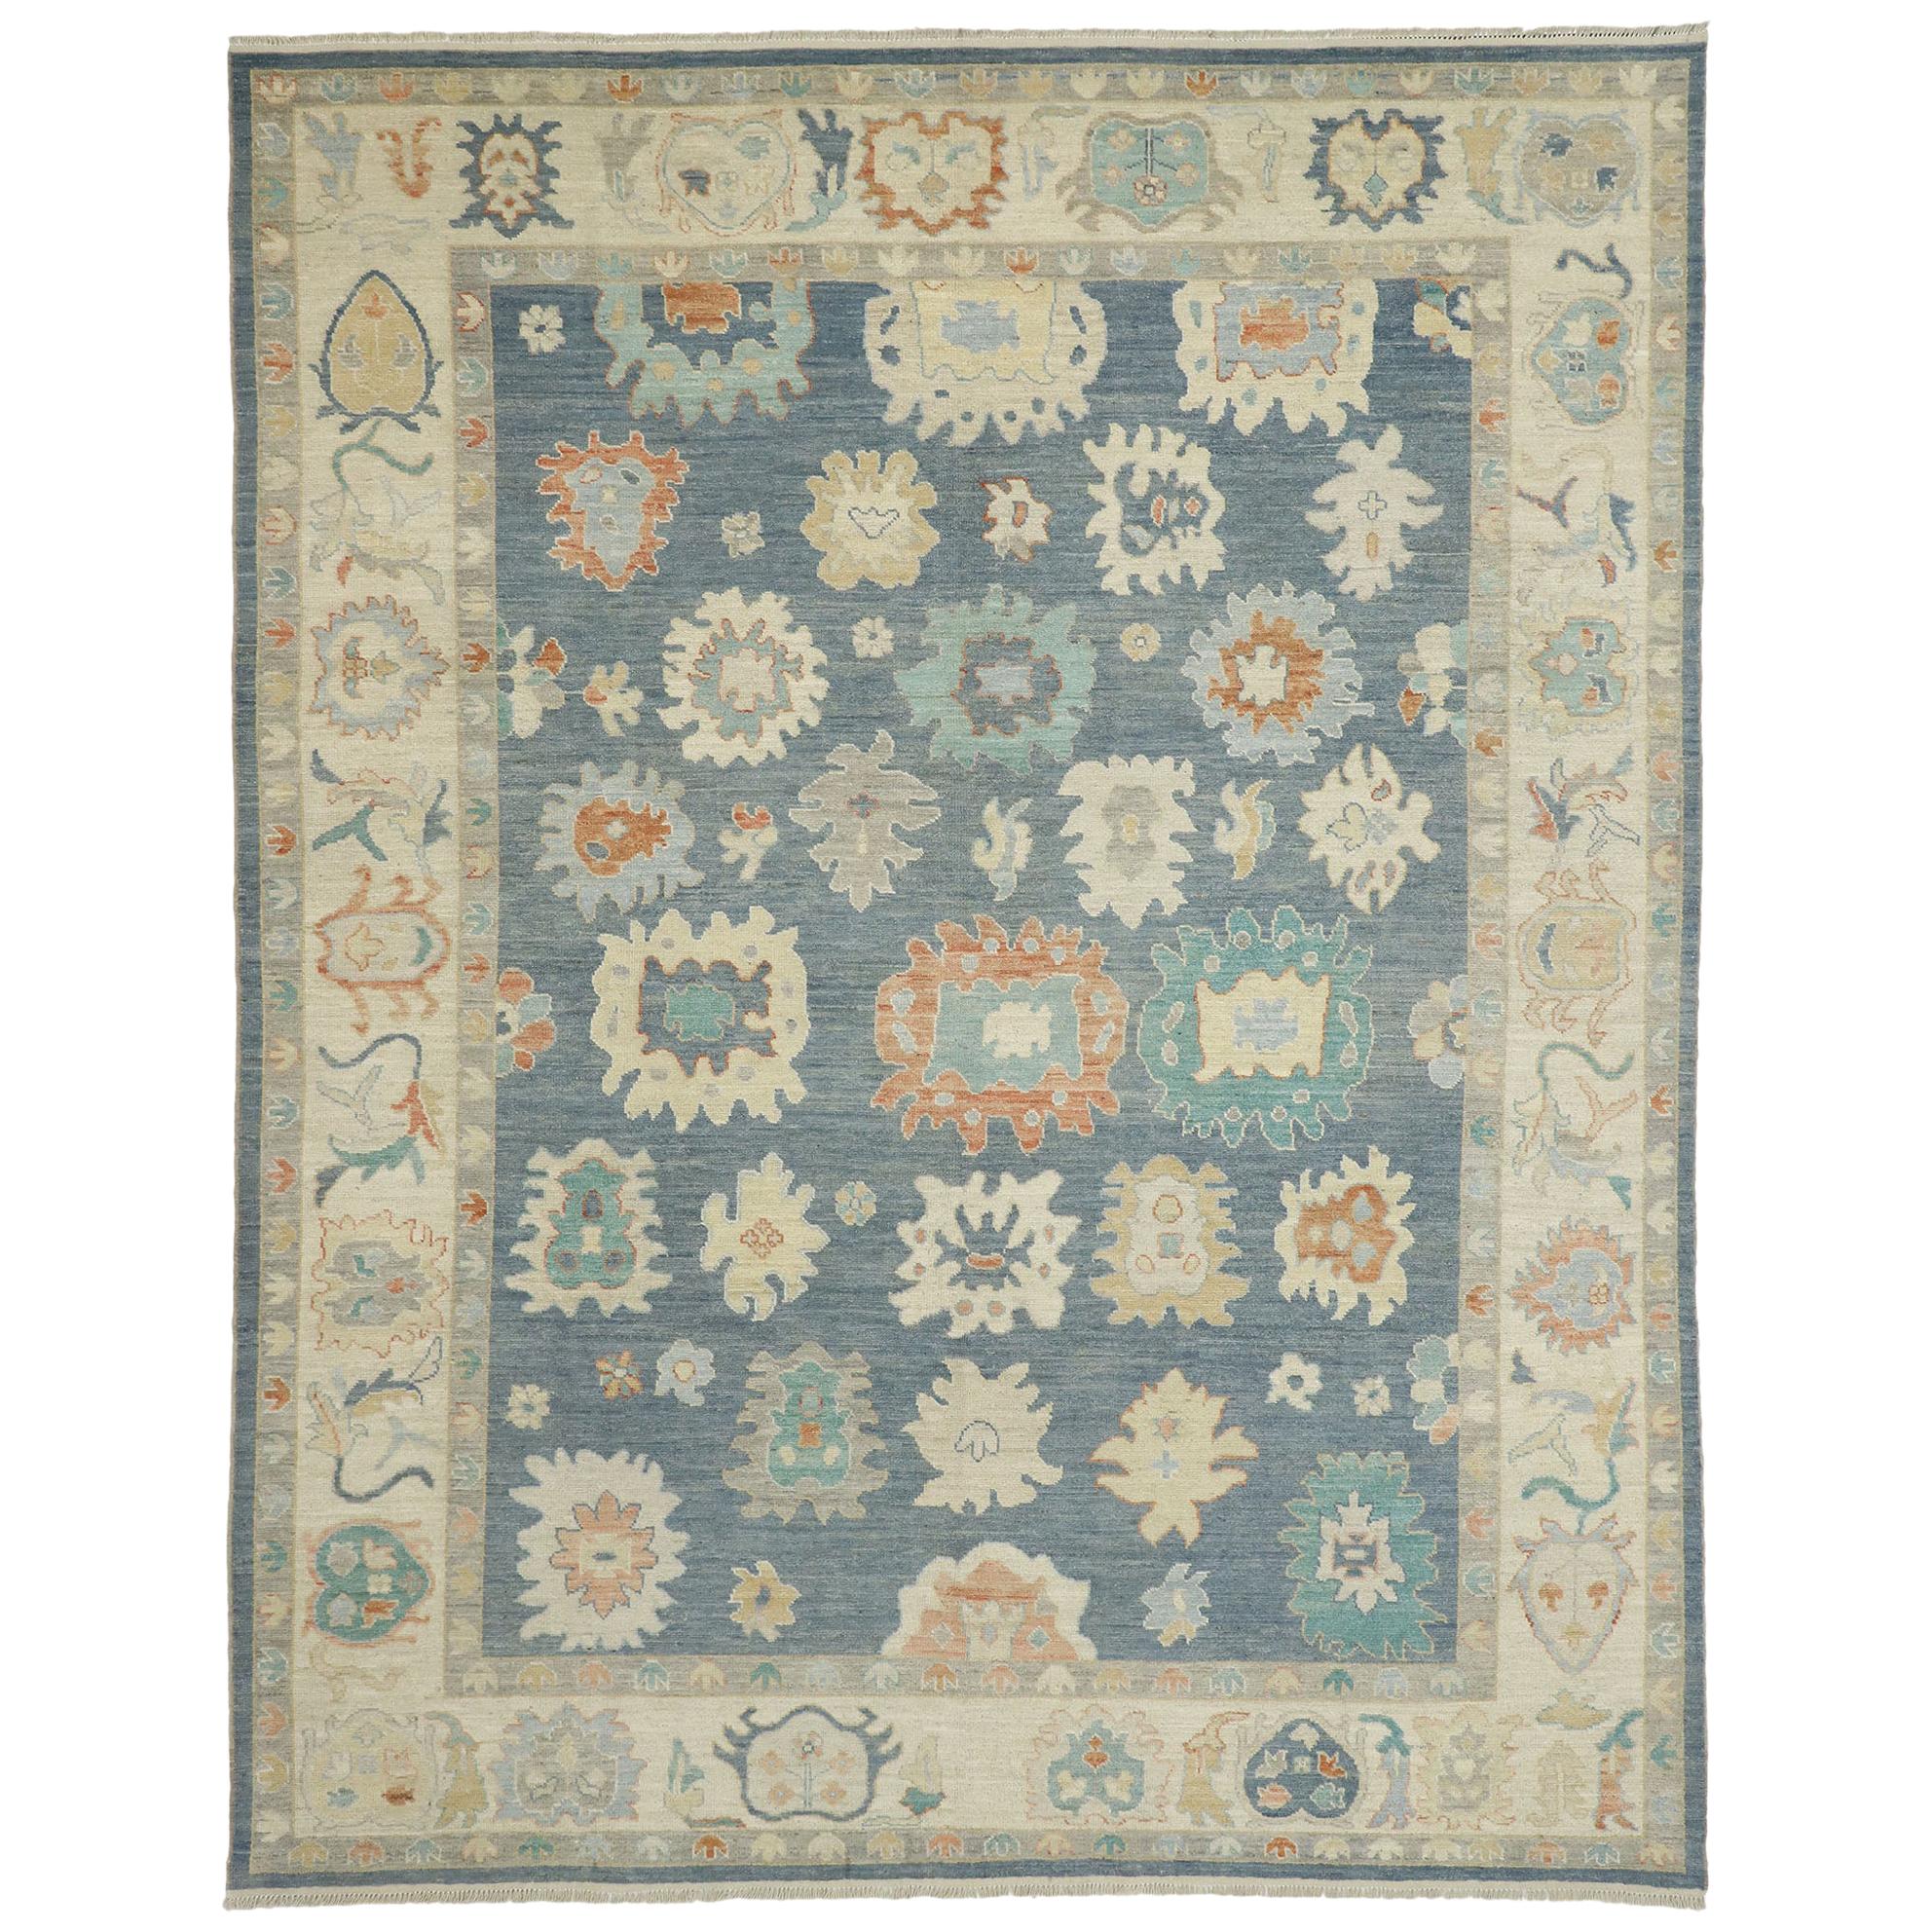 Contemporary Oushak Area Rug with Pastel Colors and French Transitional Style